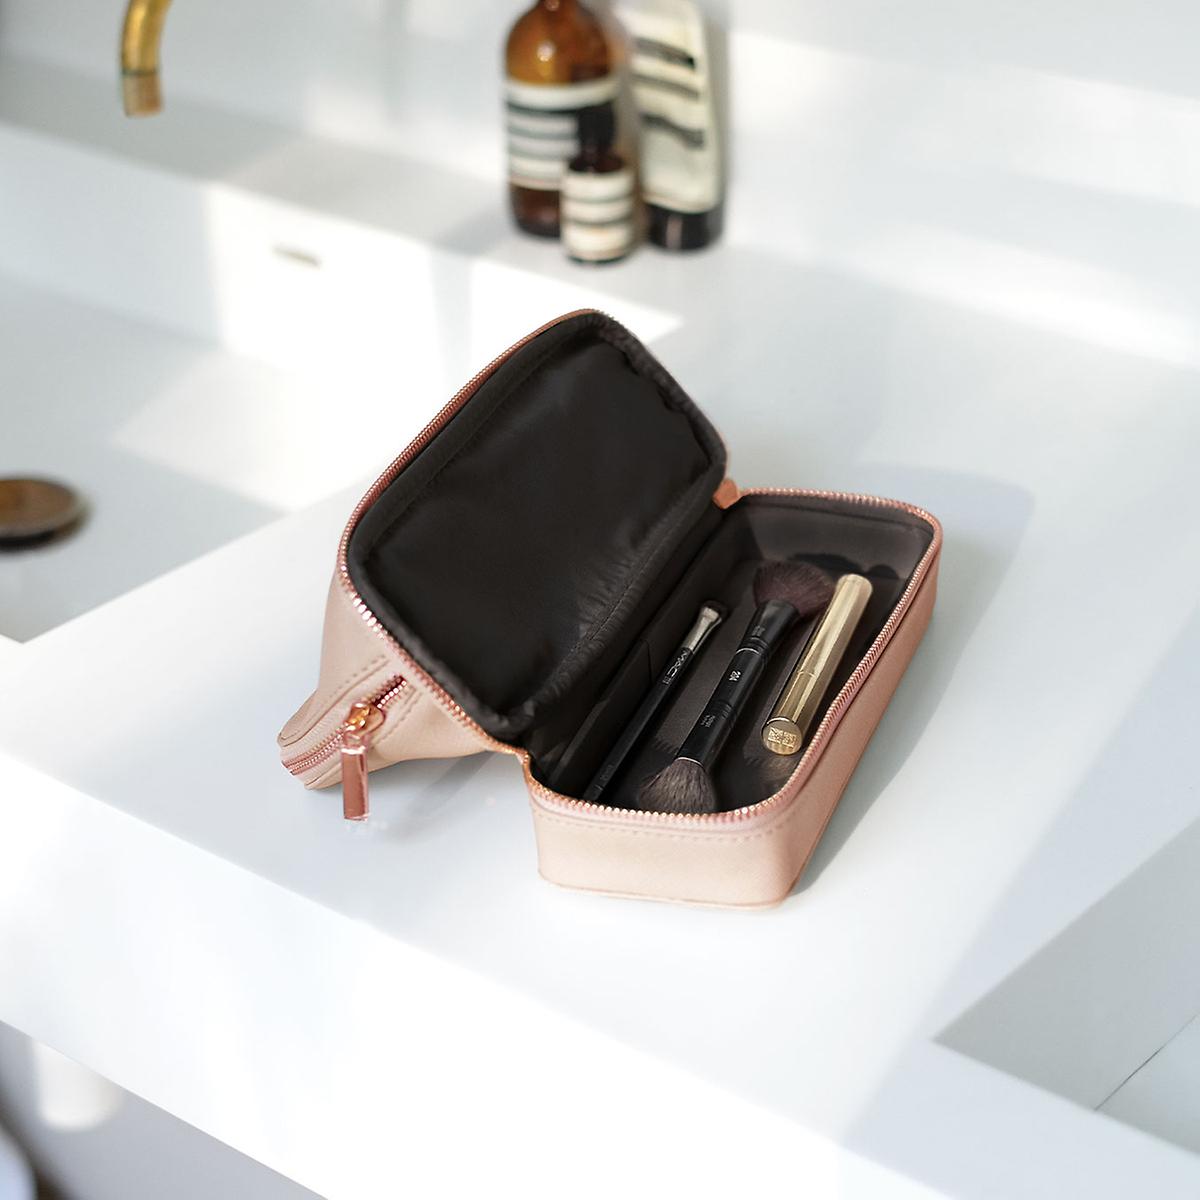 stackers makeup travel case